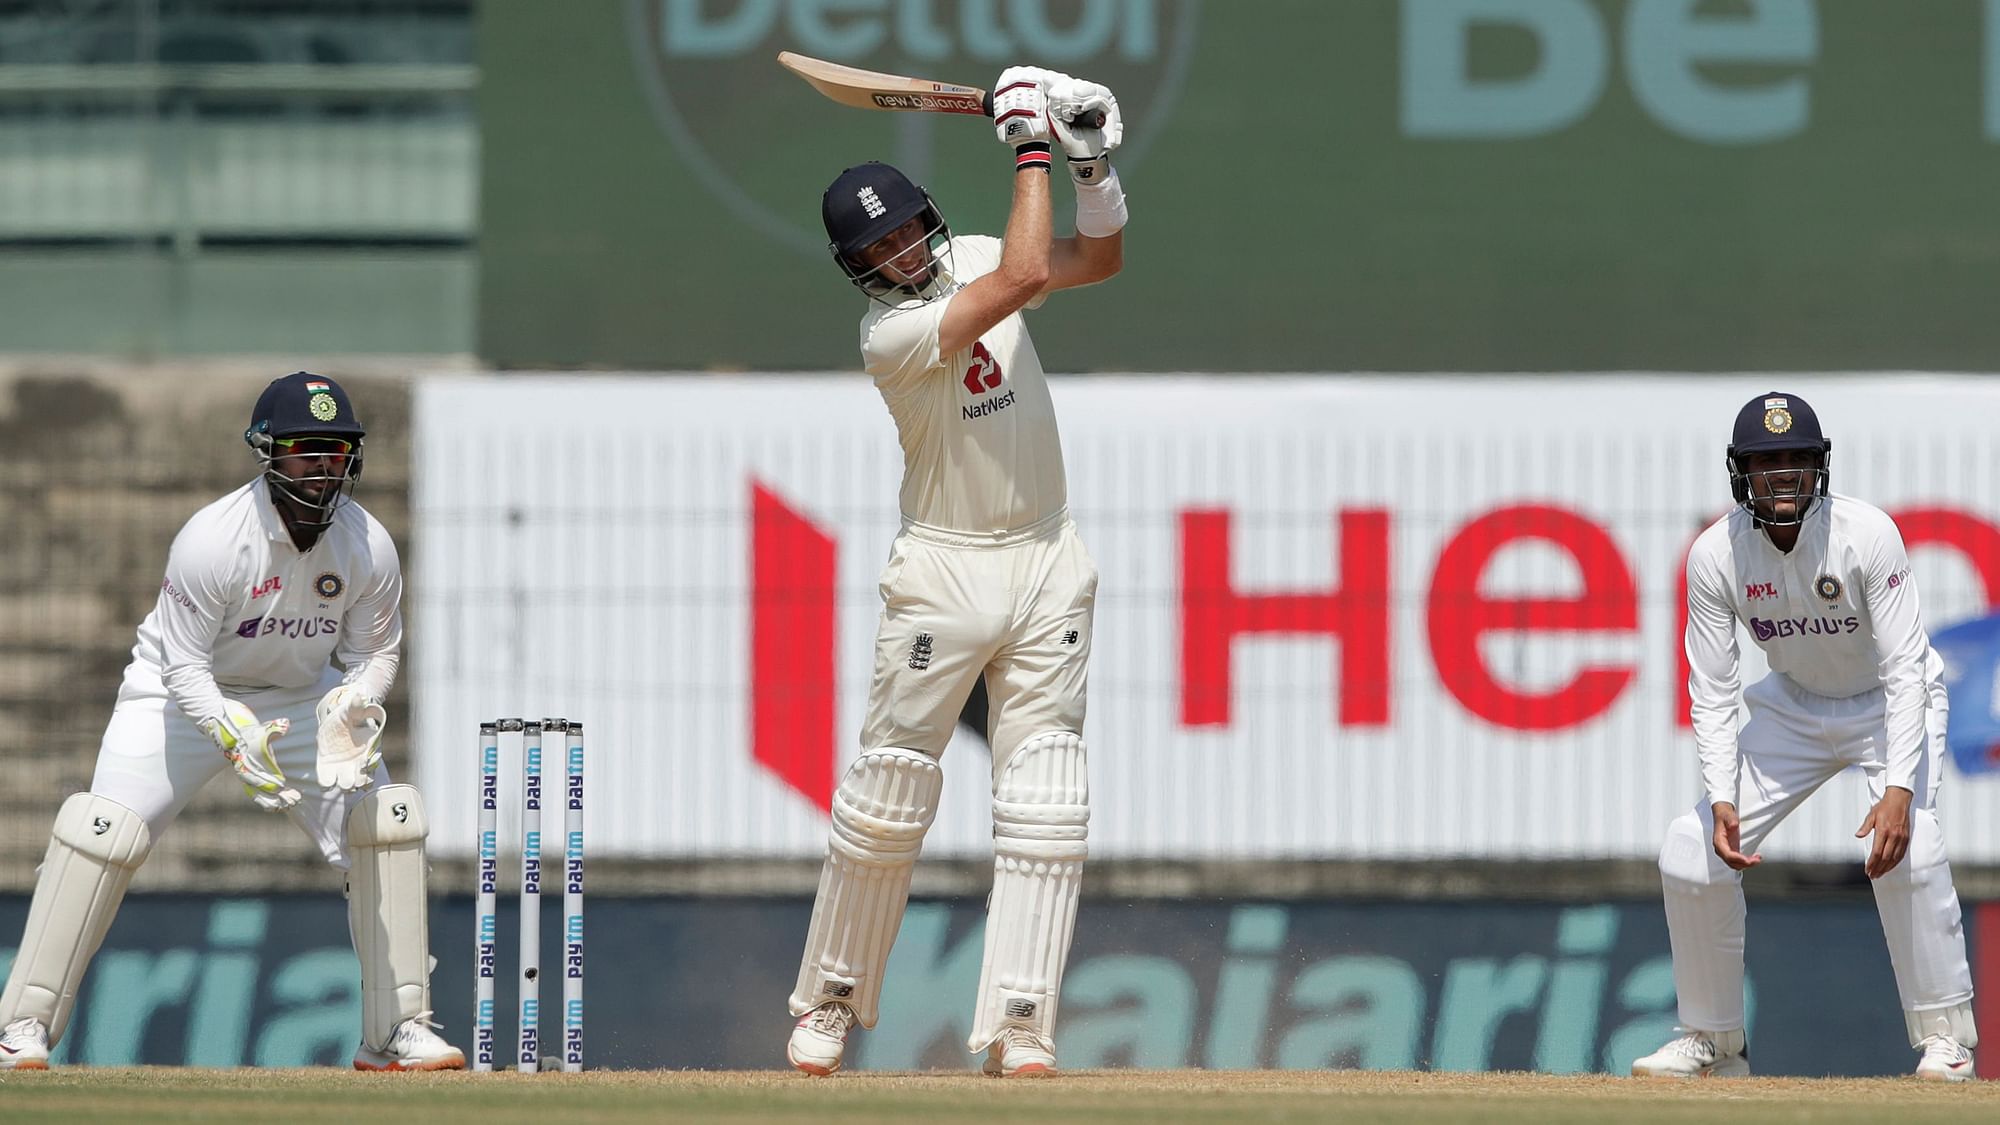 Joe Root scored a double hundred in the first innings in Chennai.&nbsp;